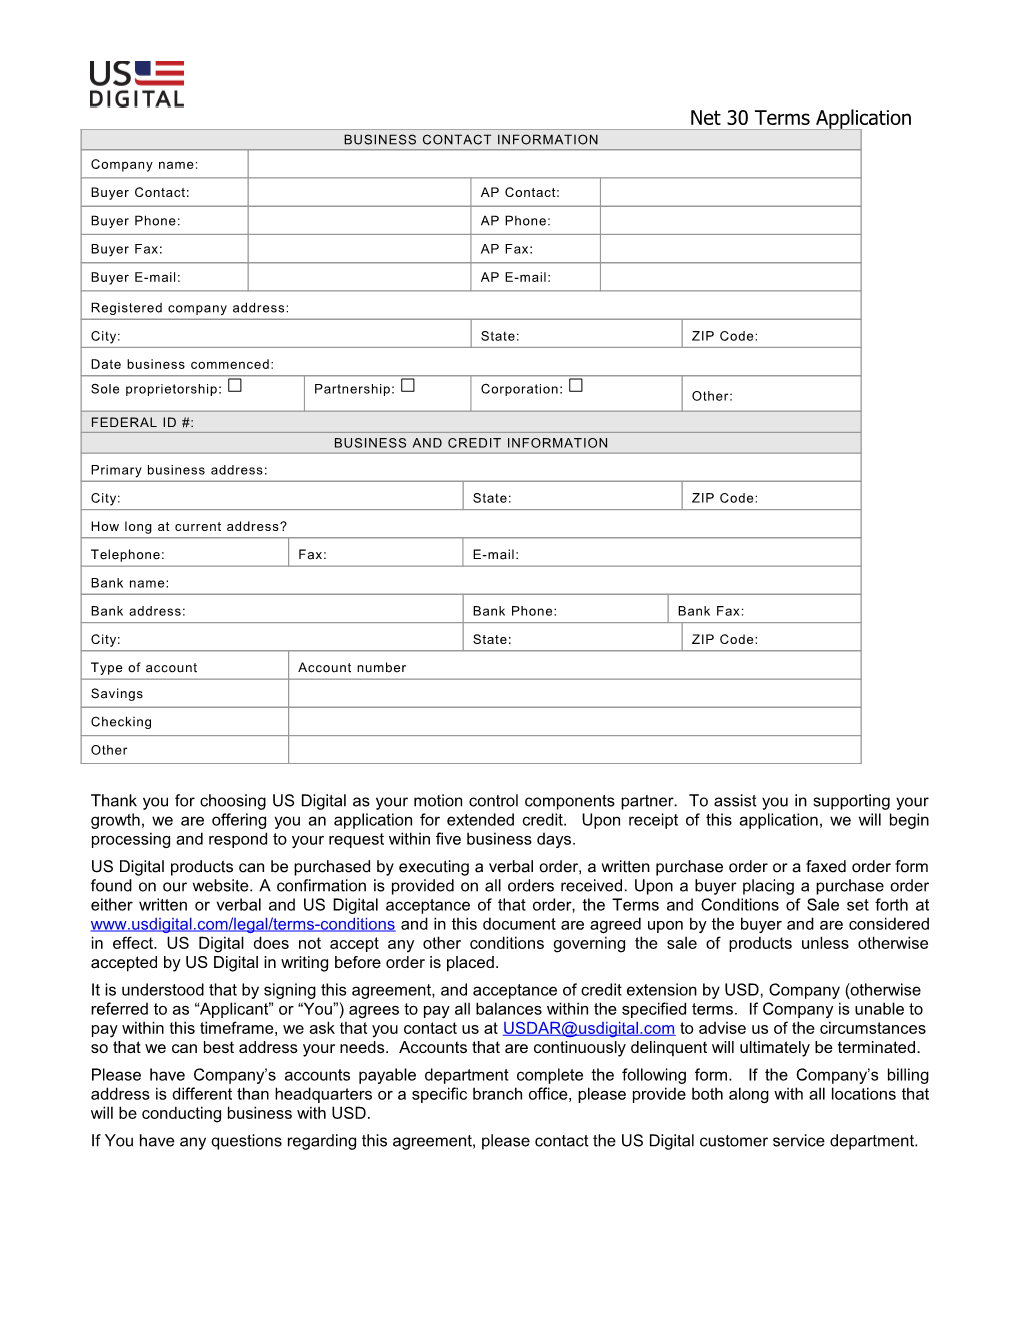 Domestic NET30 Terms Application